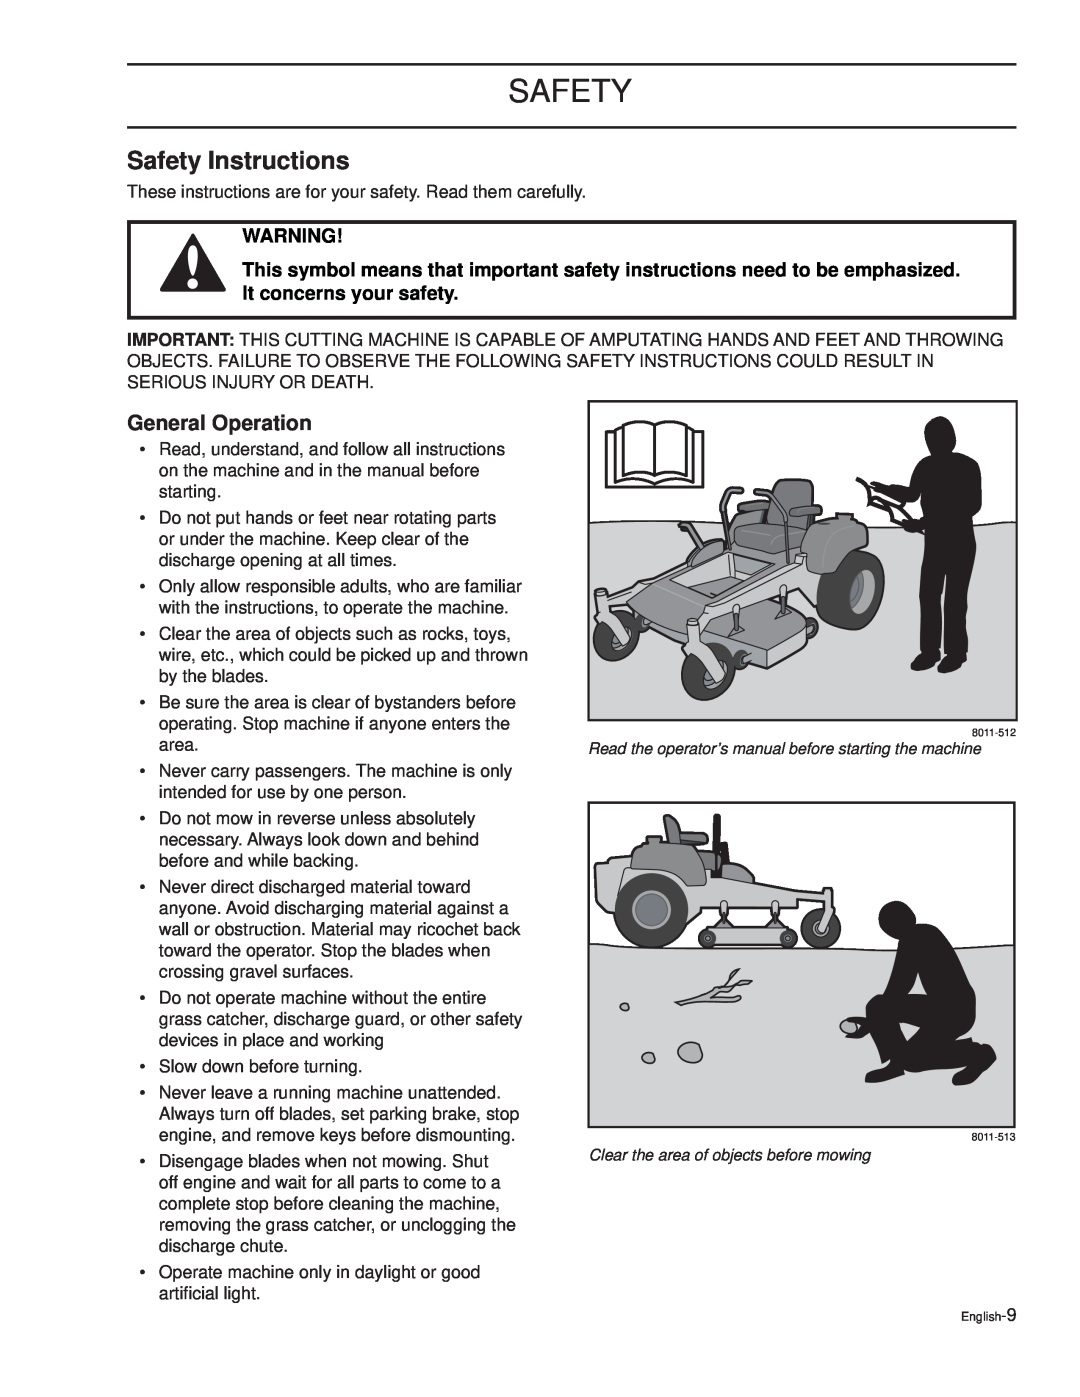 Husqvarna TRD48i, TRD61L, TRD52i, CD61B, CD61L, CD52i, CD52L, CD48i manual Safety Instructions, General Operation 